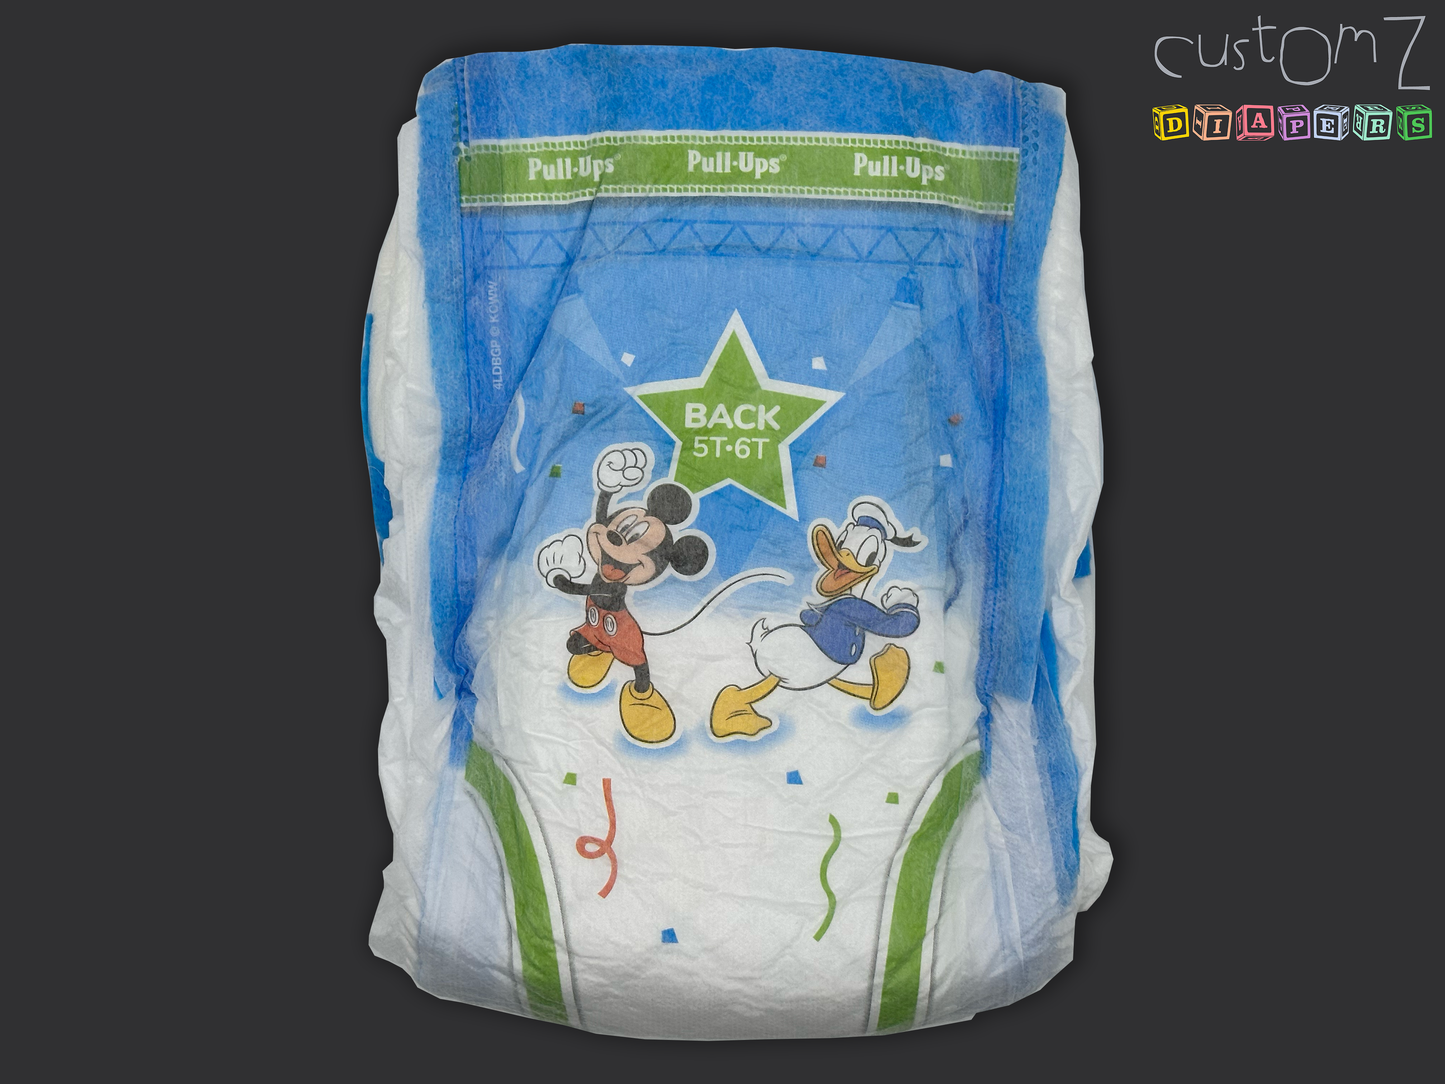 CustomZ Mr Mouse ABDL Adult Baby Diaper Nappy - 1 x Nappy